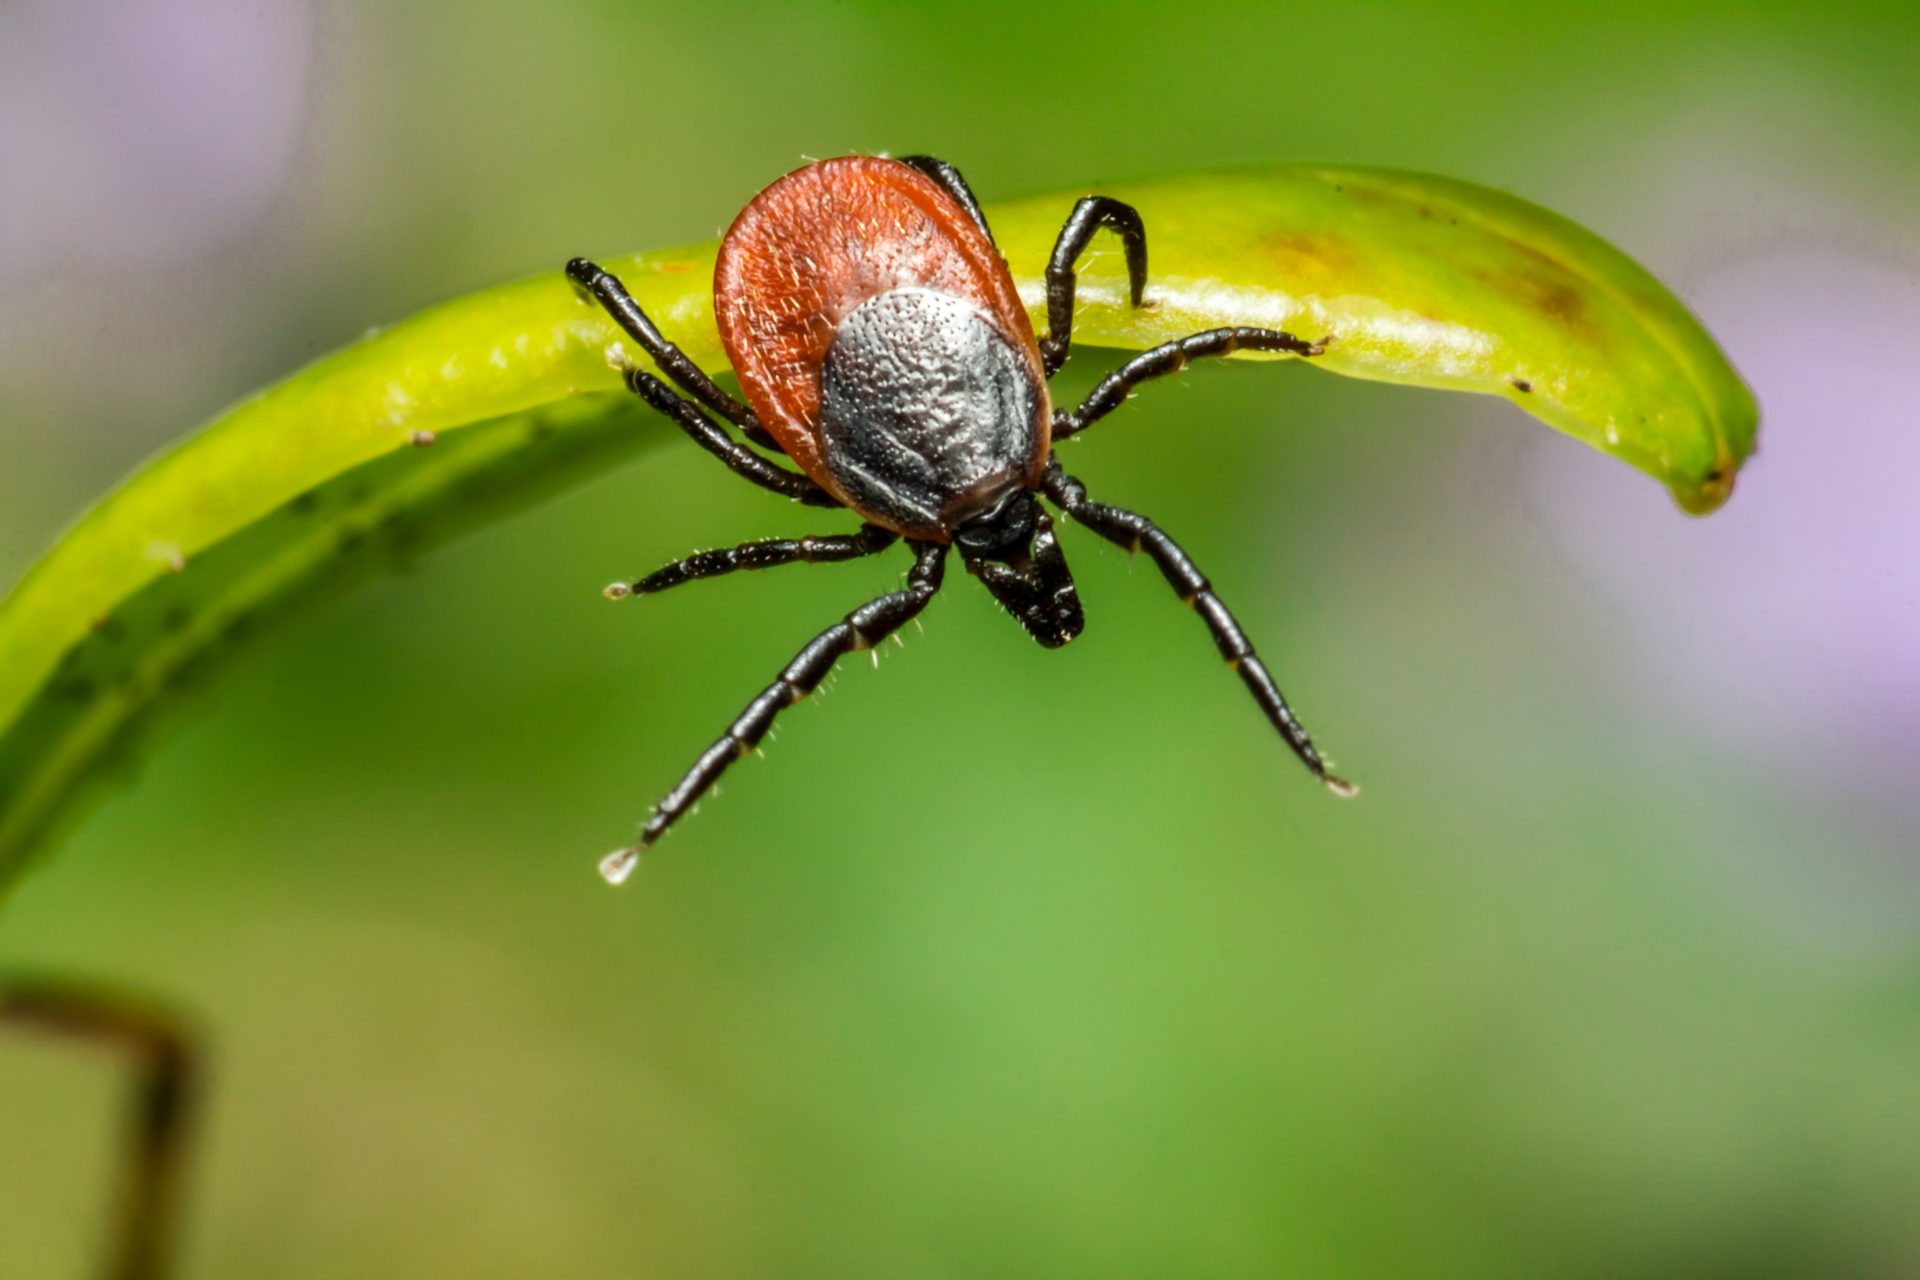 Tick Warning: Protect Yourself This Spring with These Tips